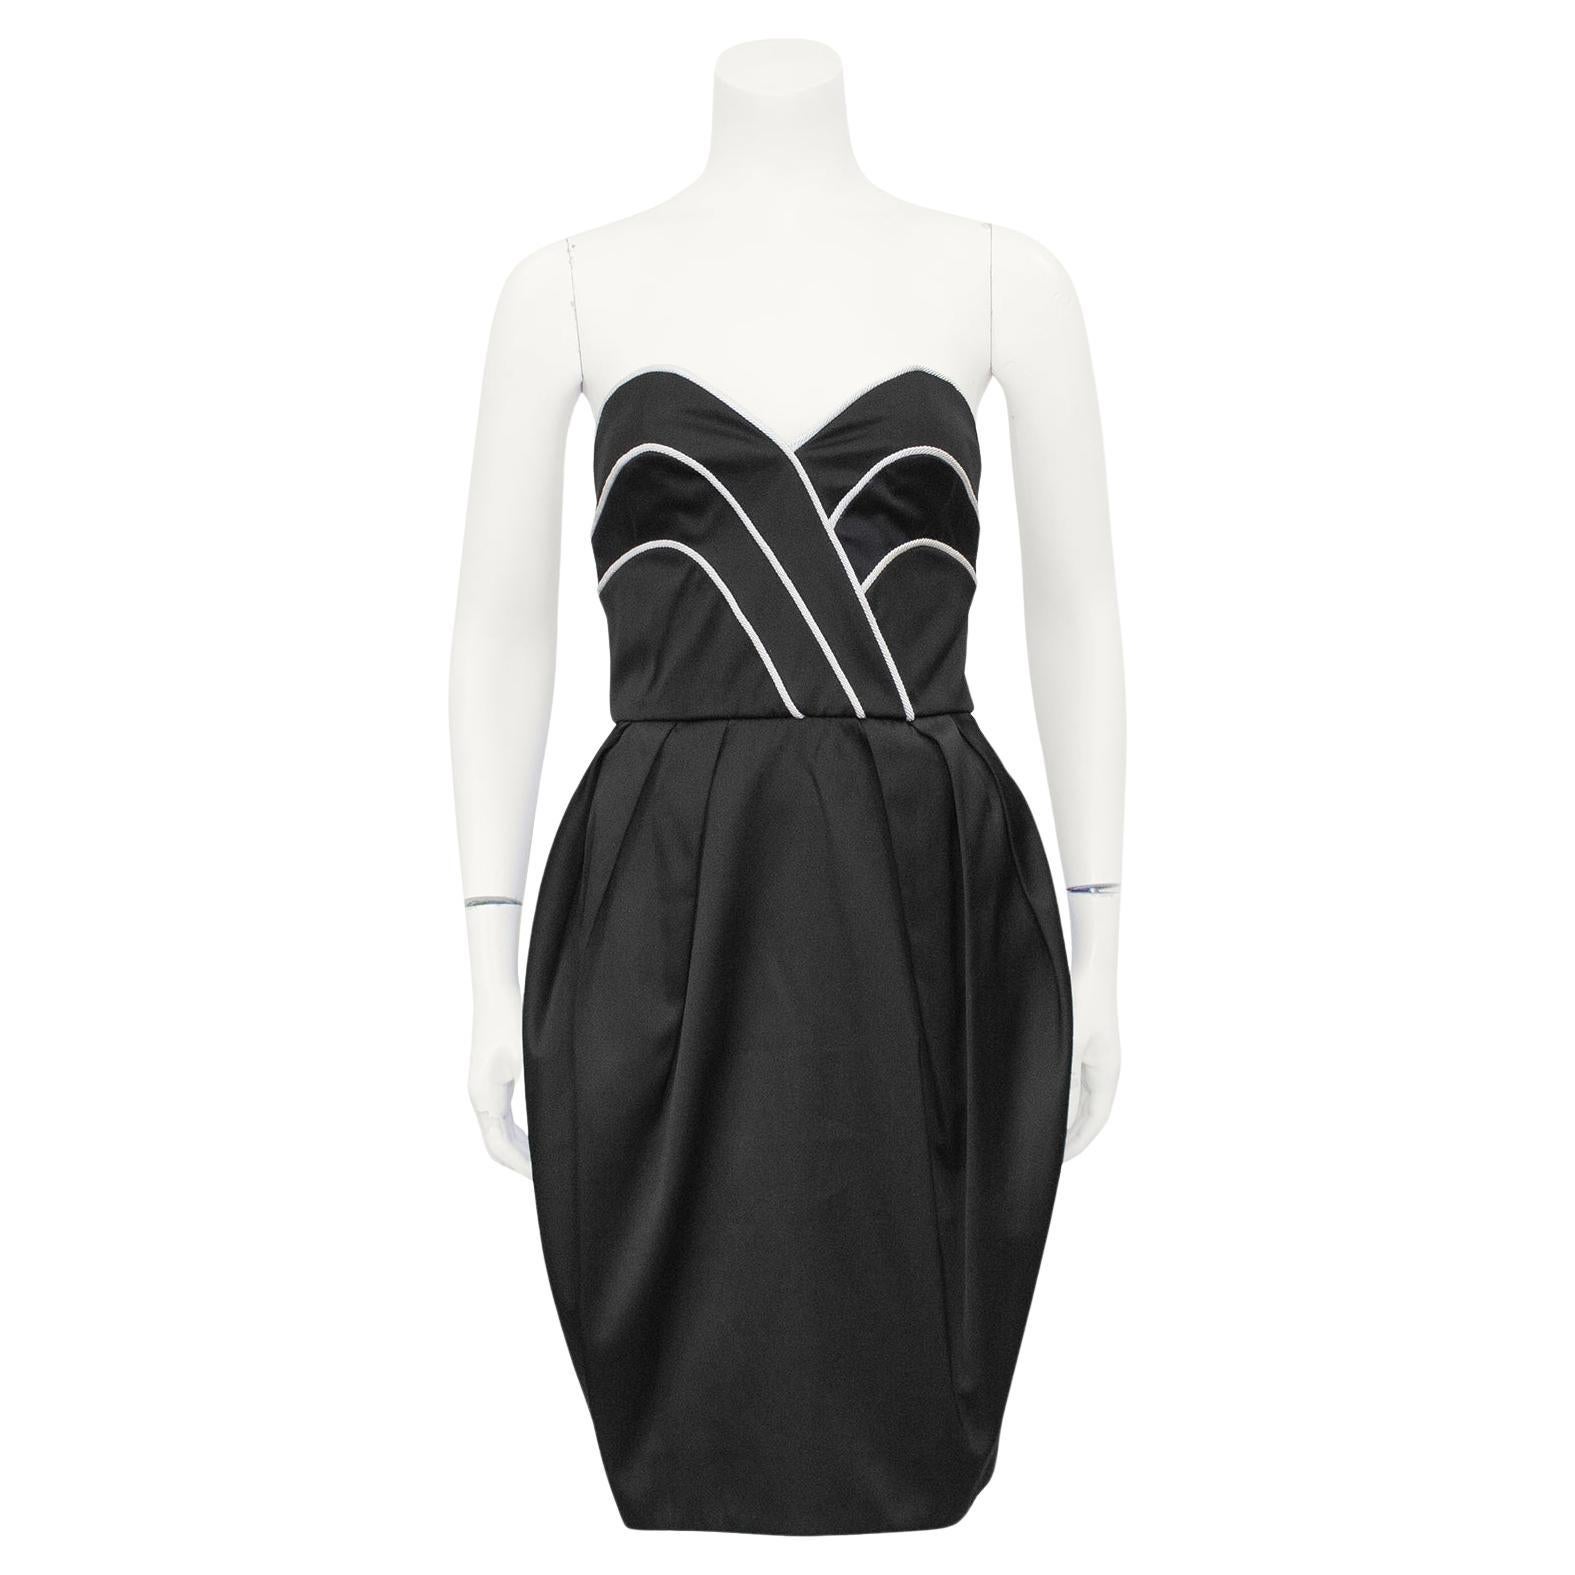 1980s Lanvin Black Satin Cocktail Dress with White Piping For Sale